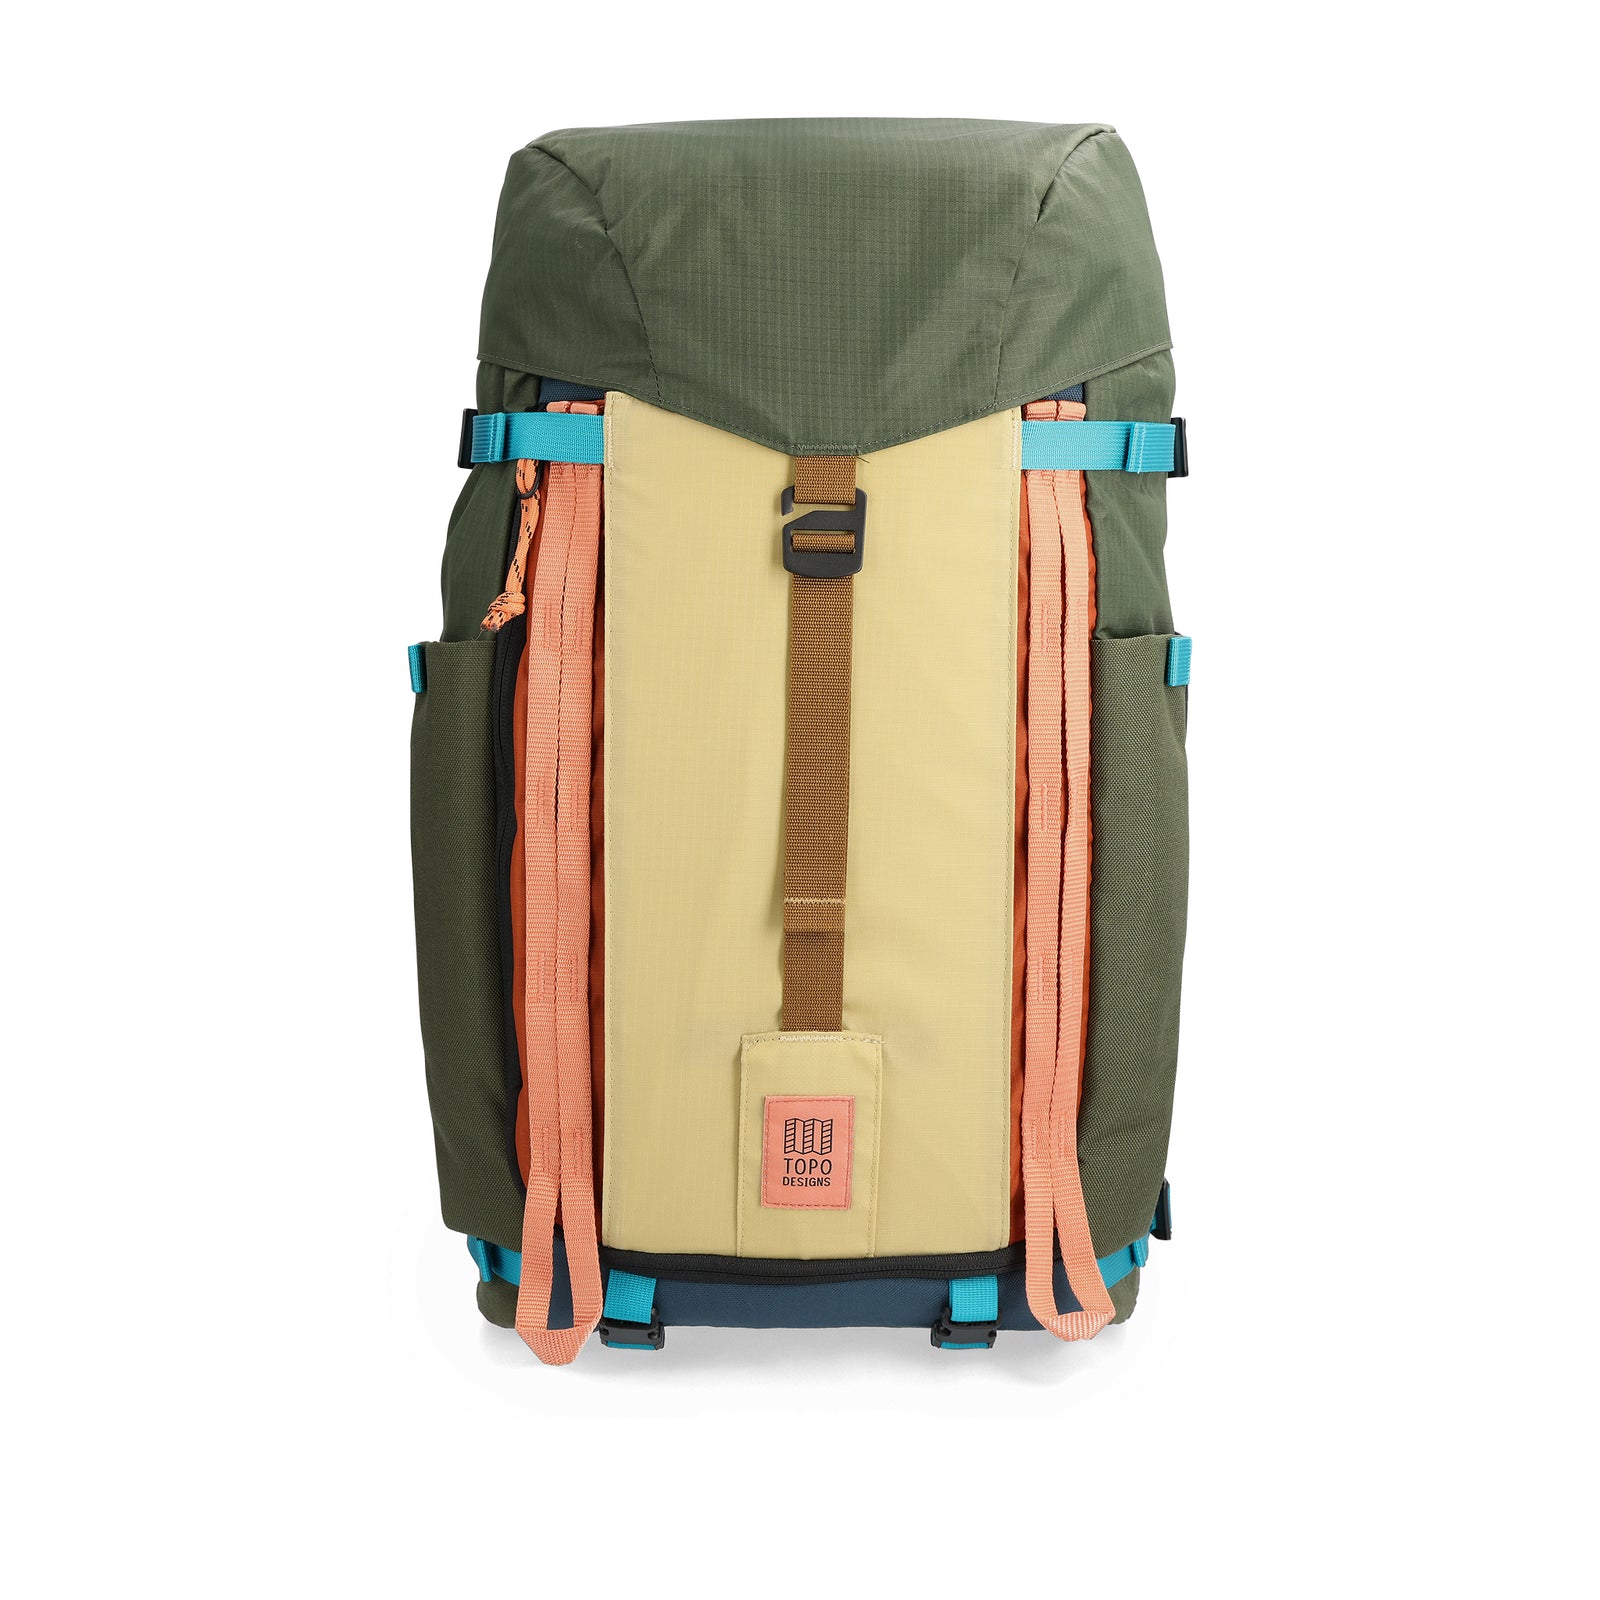 Front View of Topo Designs Mountain Pack 28L in "Olive / Hemp"